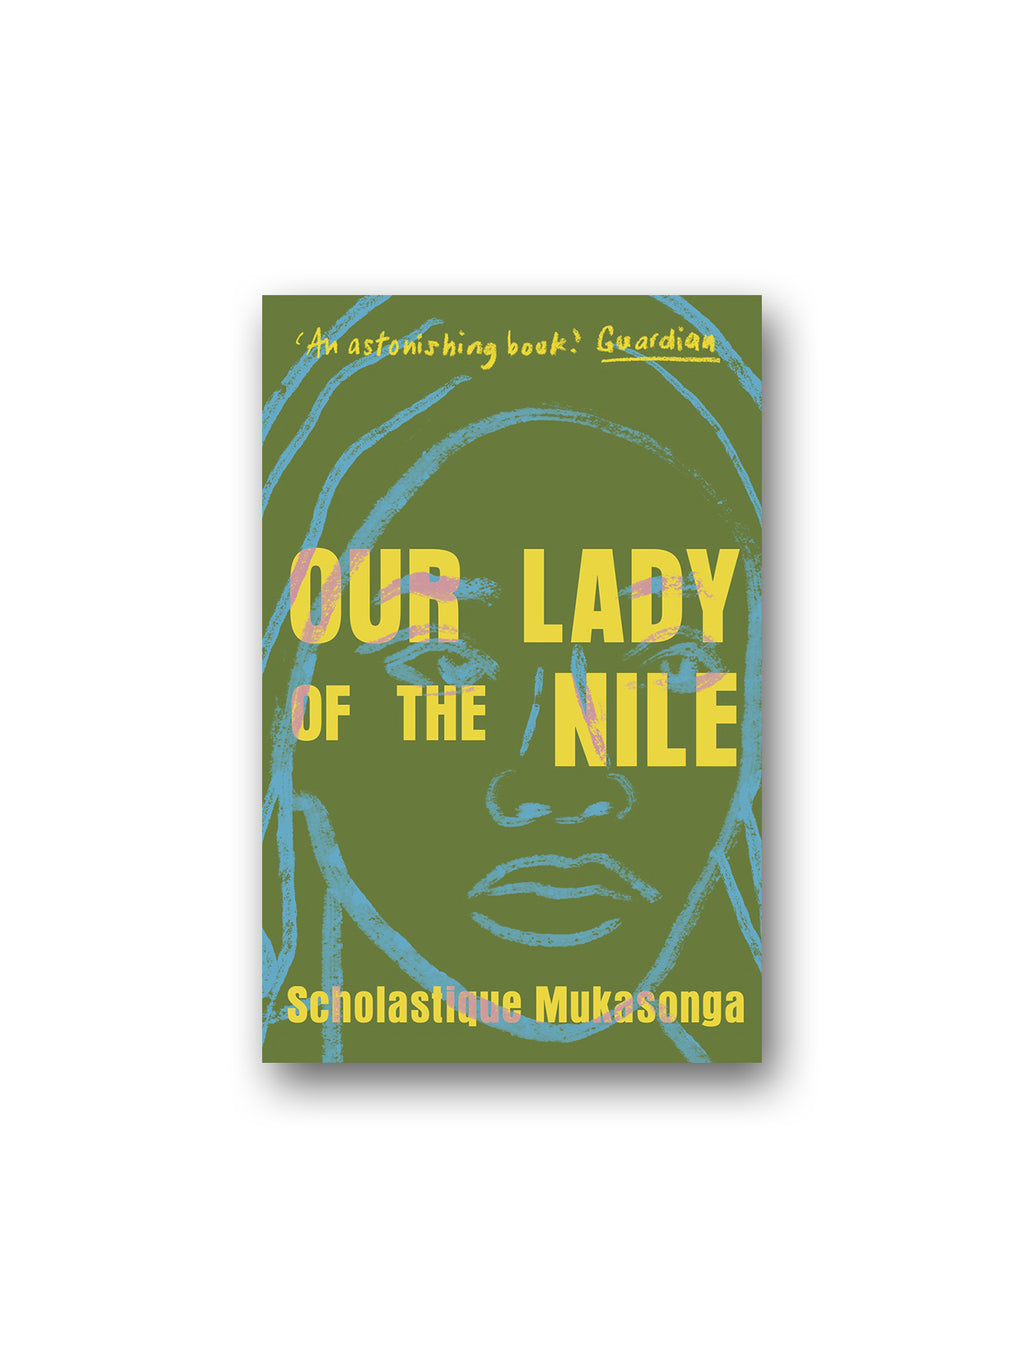 Our Lady of the Nile